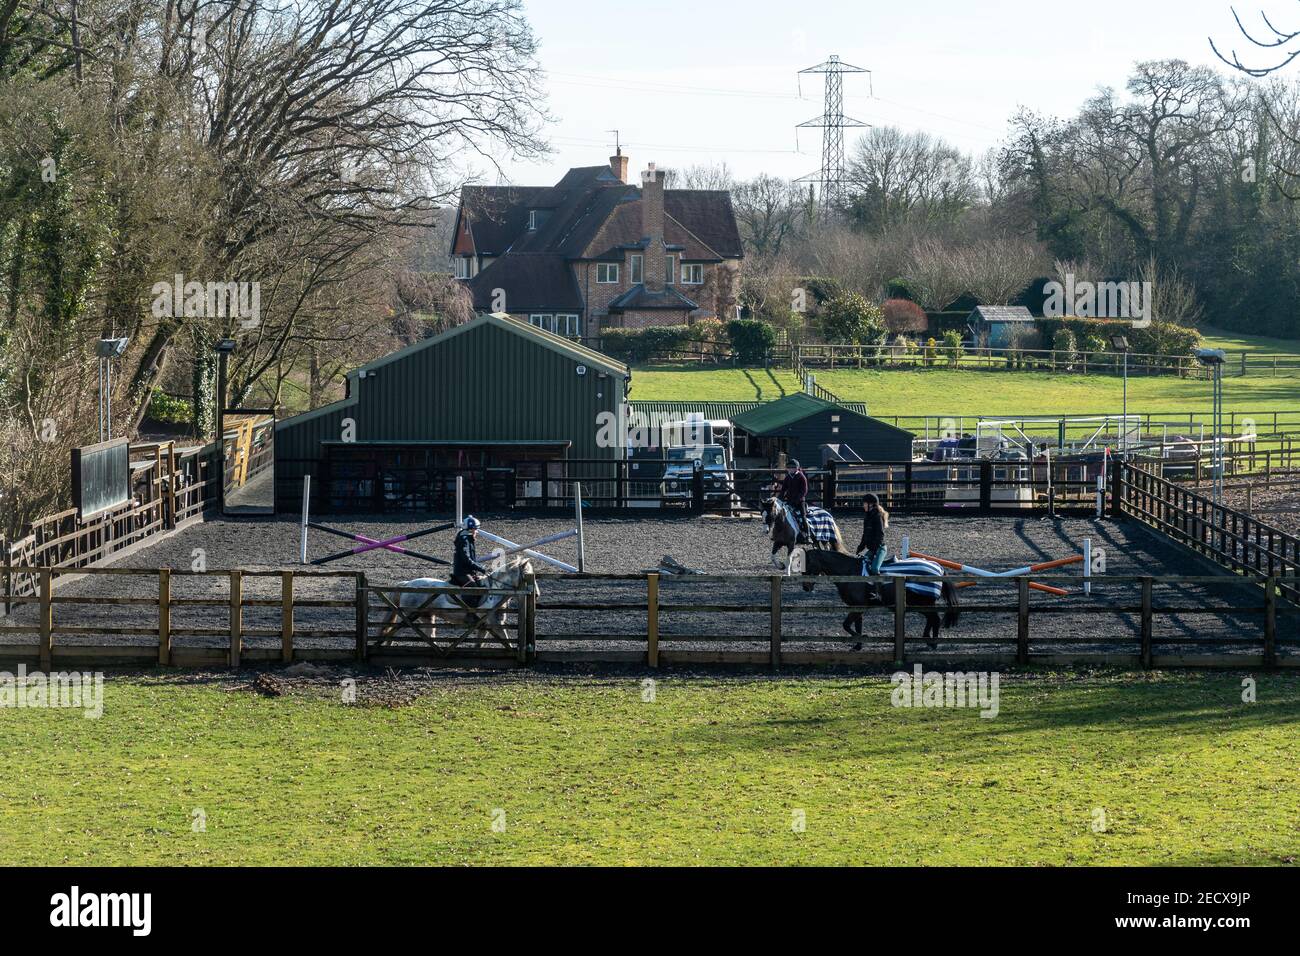 Outdoor horse riding arena at riding school with three riders on horses, Hampshire, England, UK Stock Photo